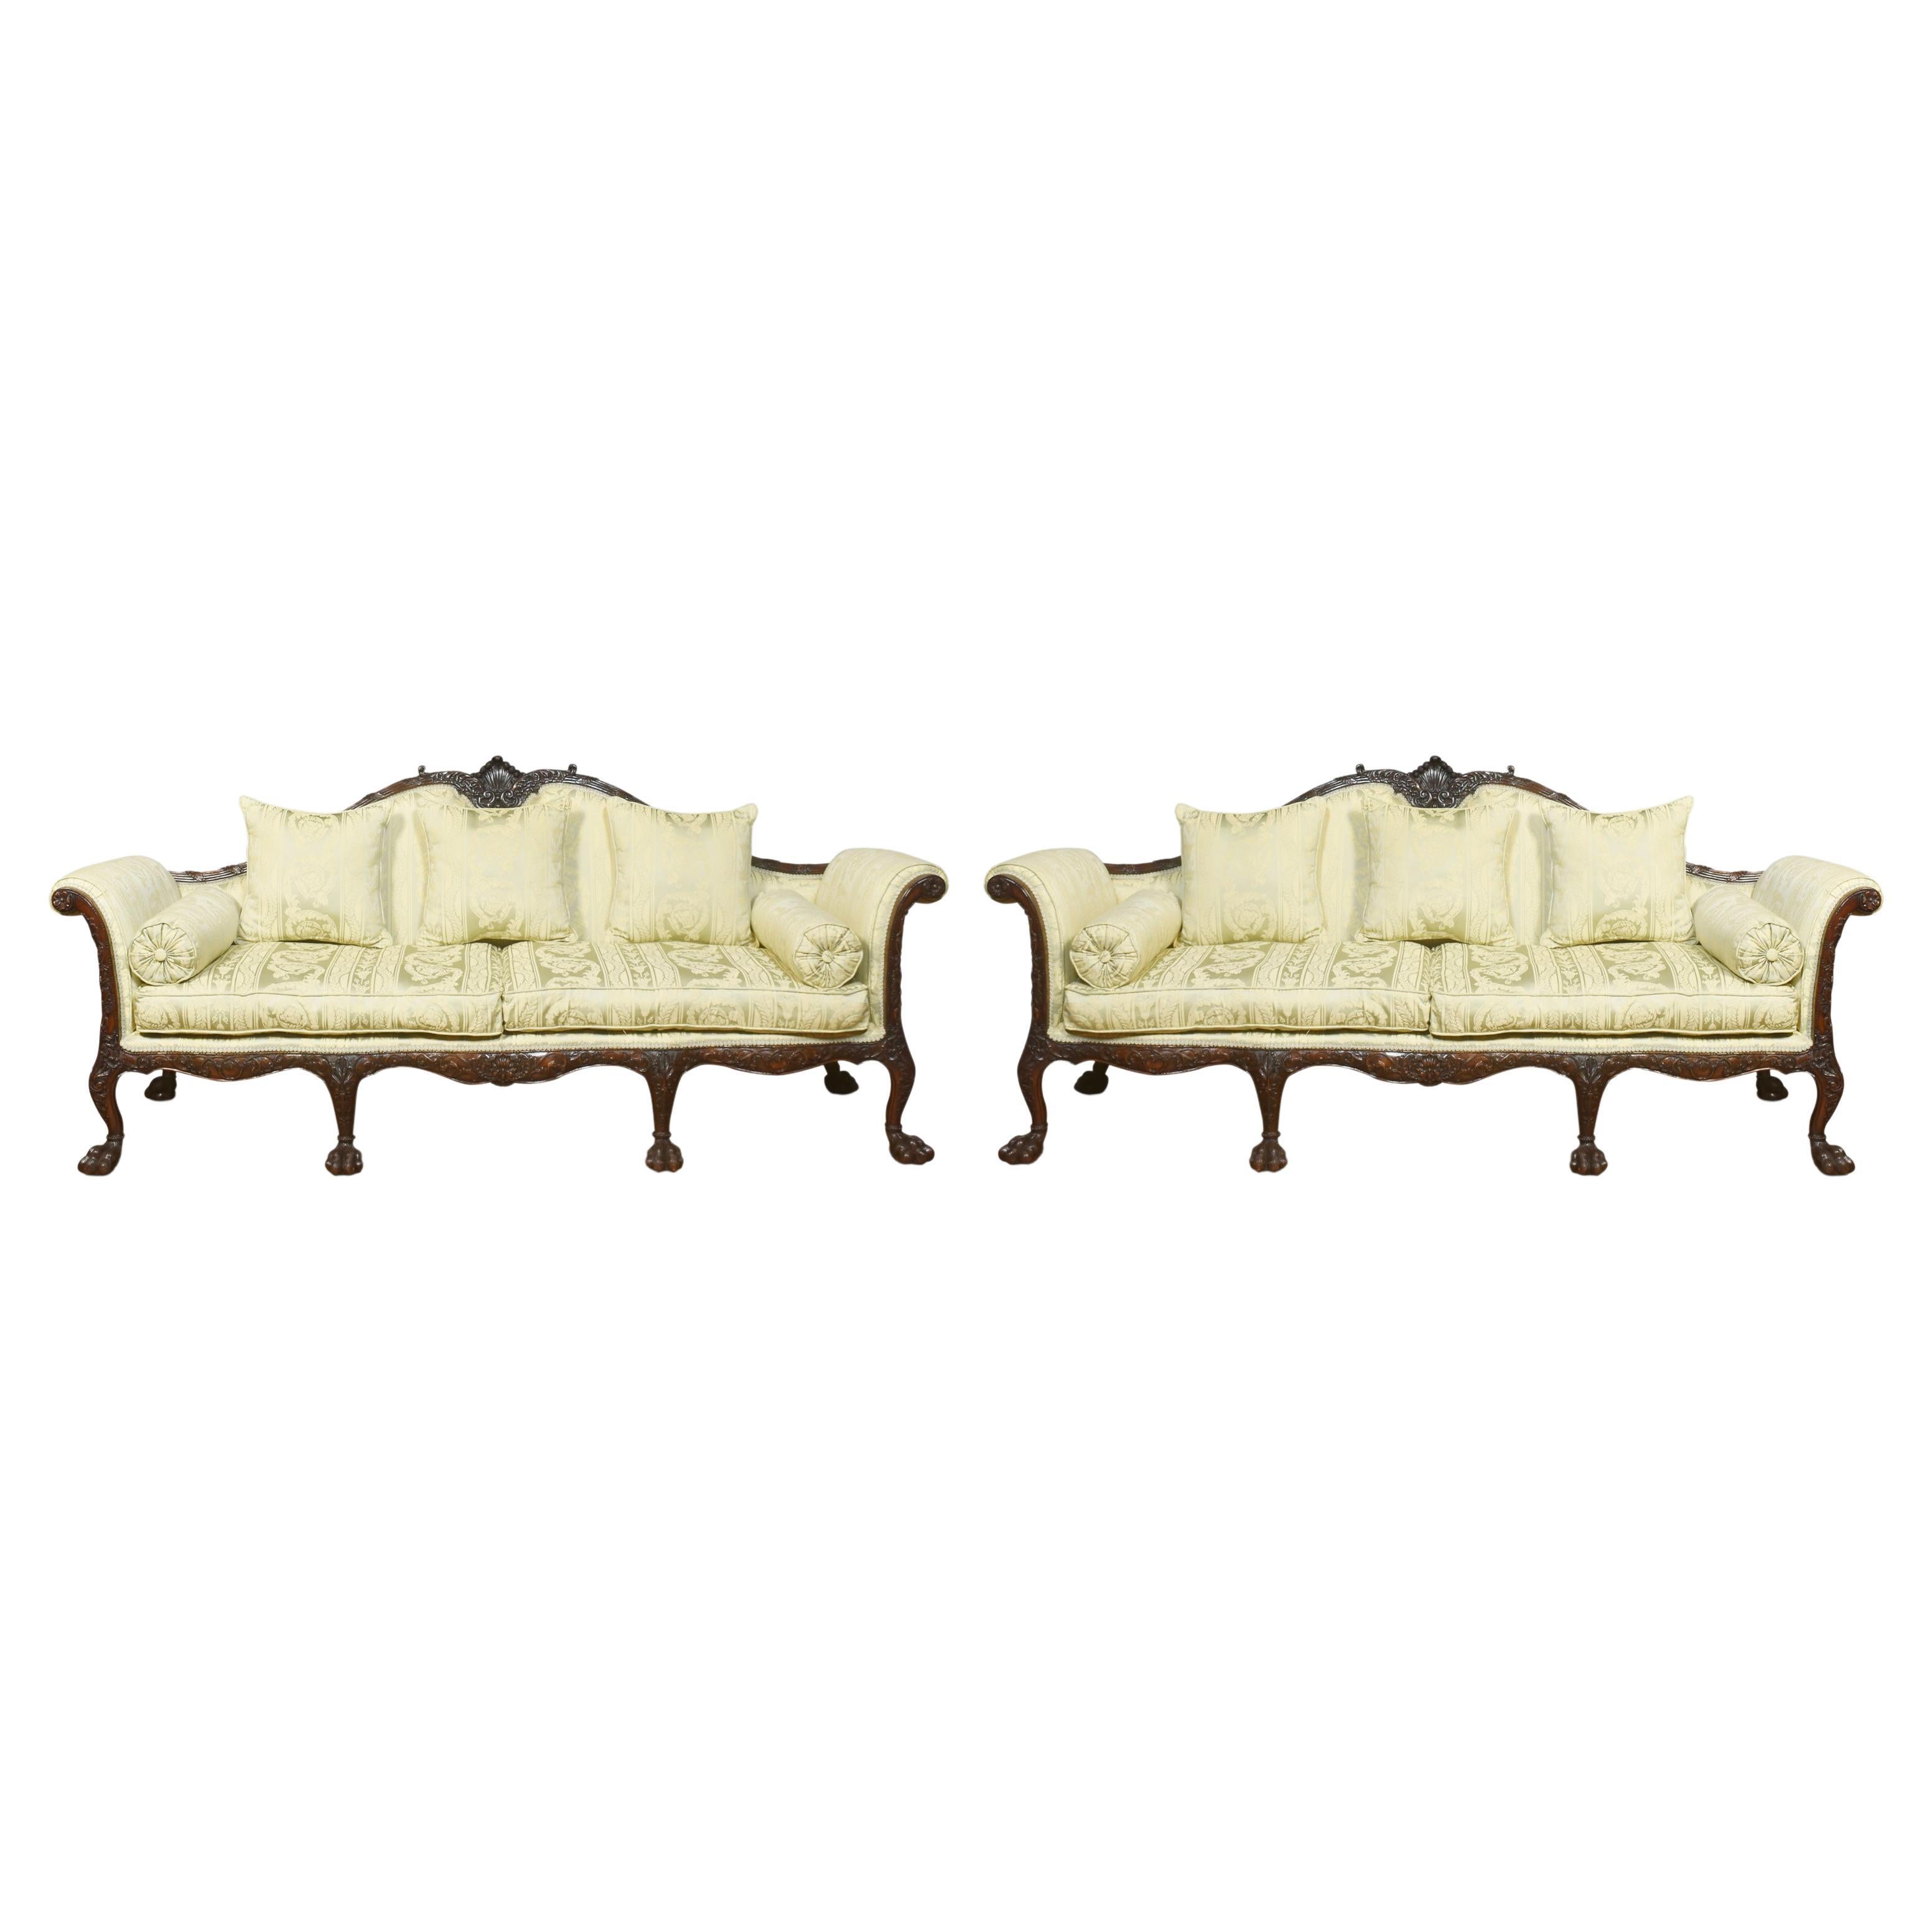 Pair of Chippendale Revival Settees For Sale